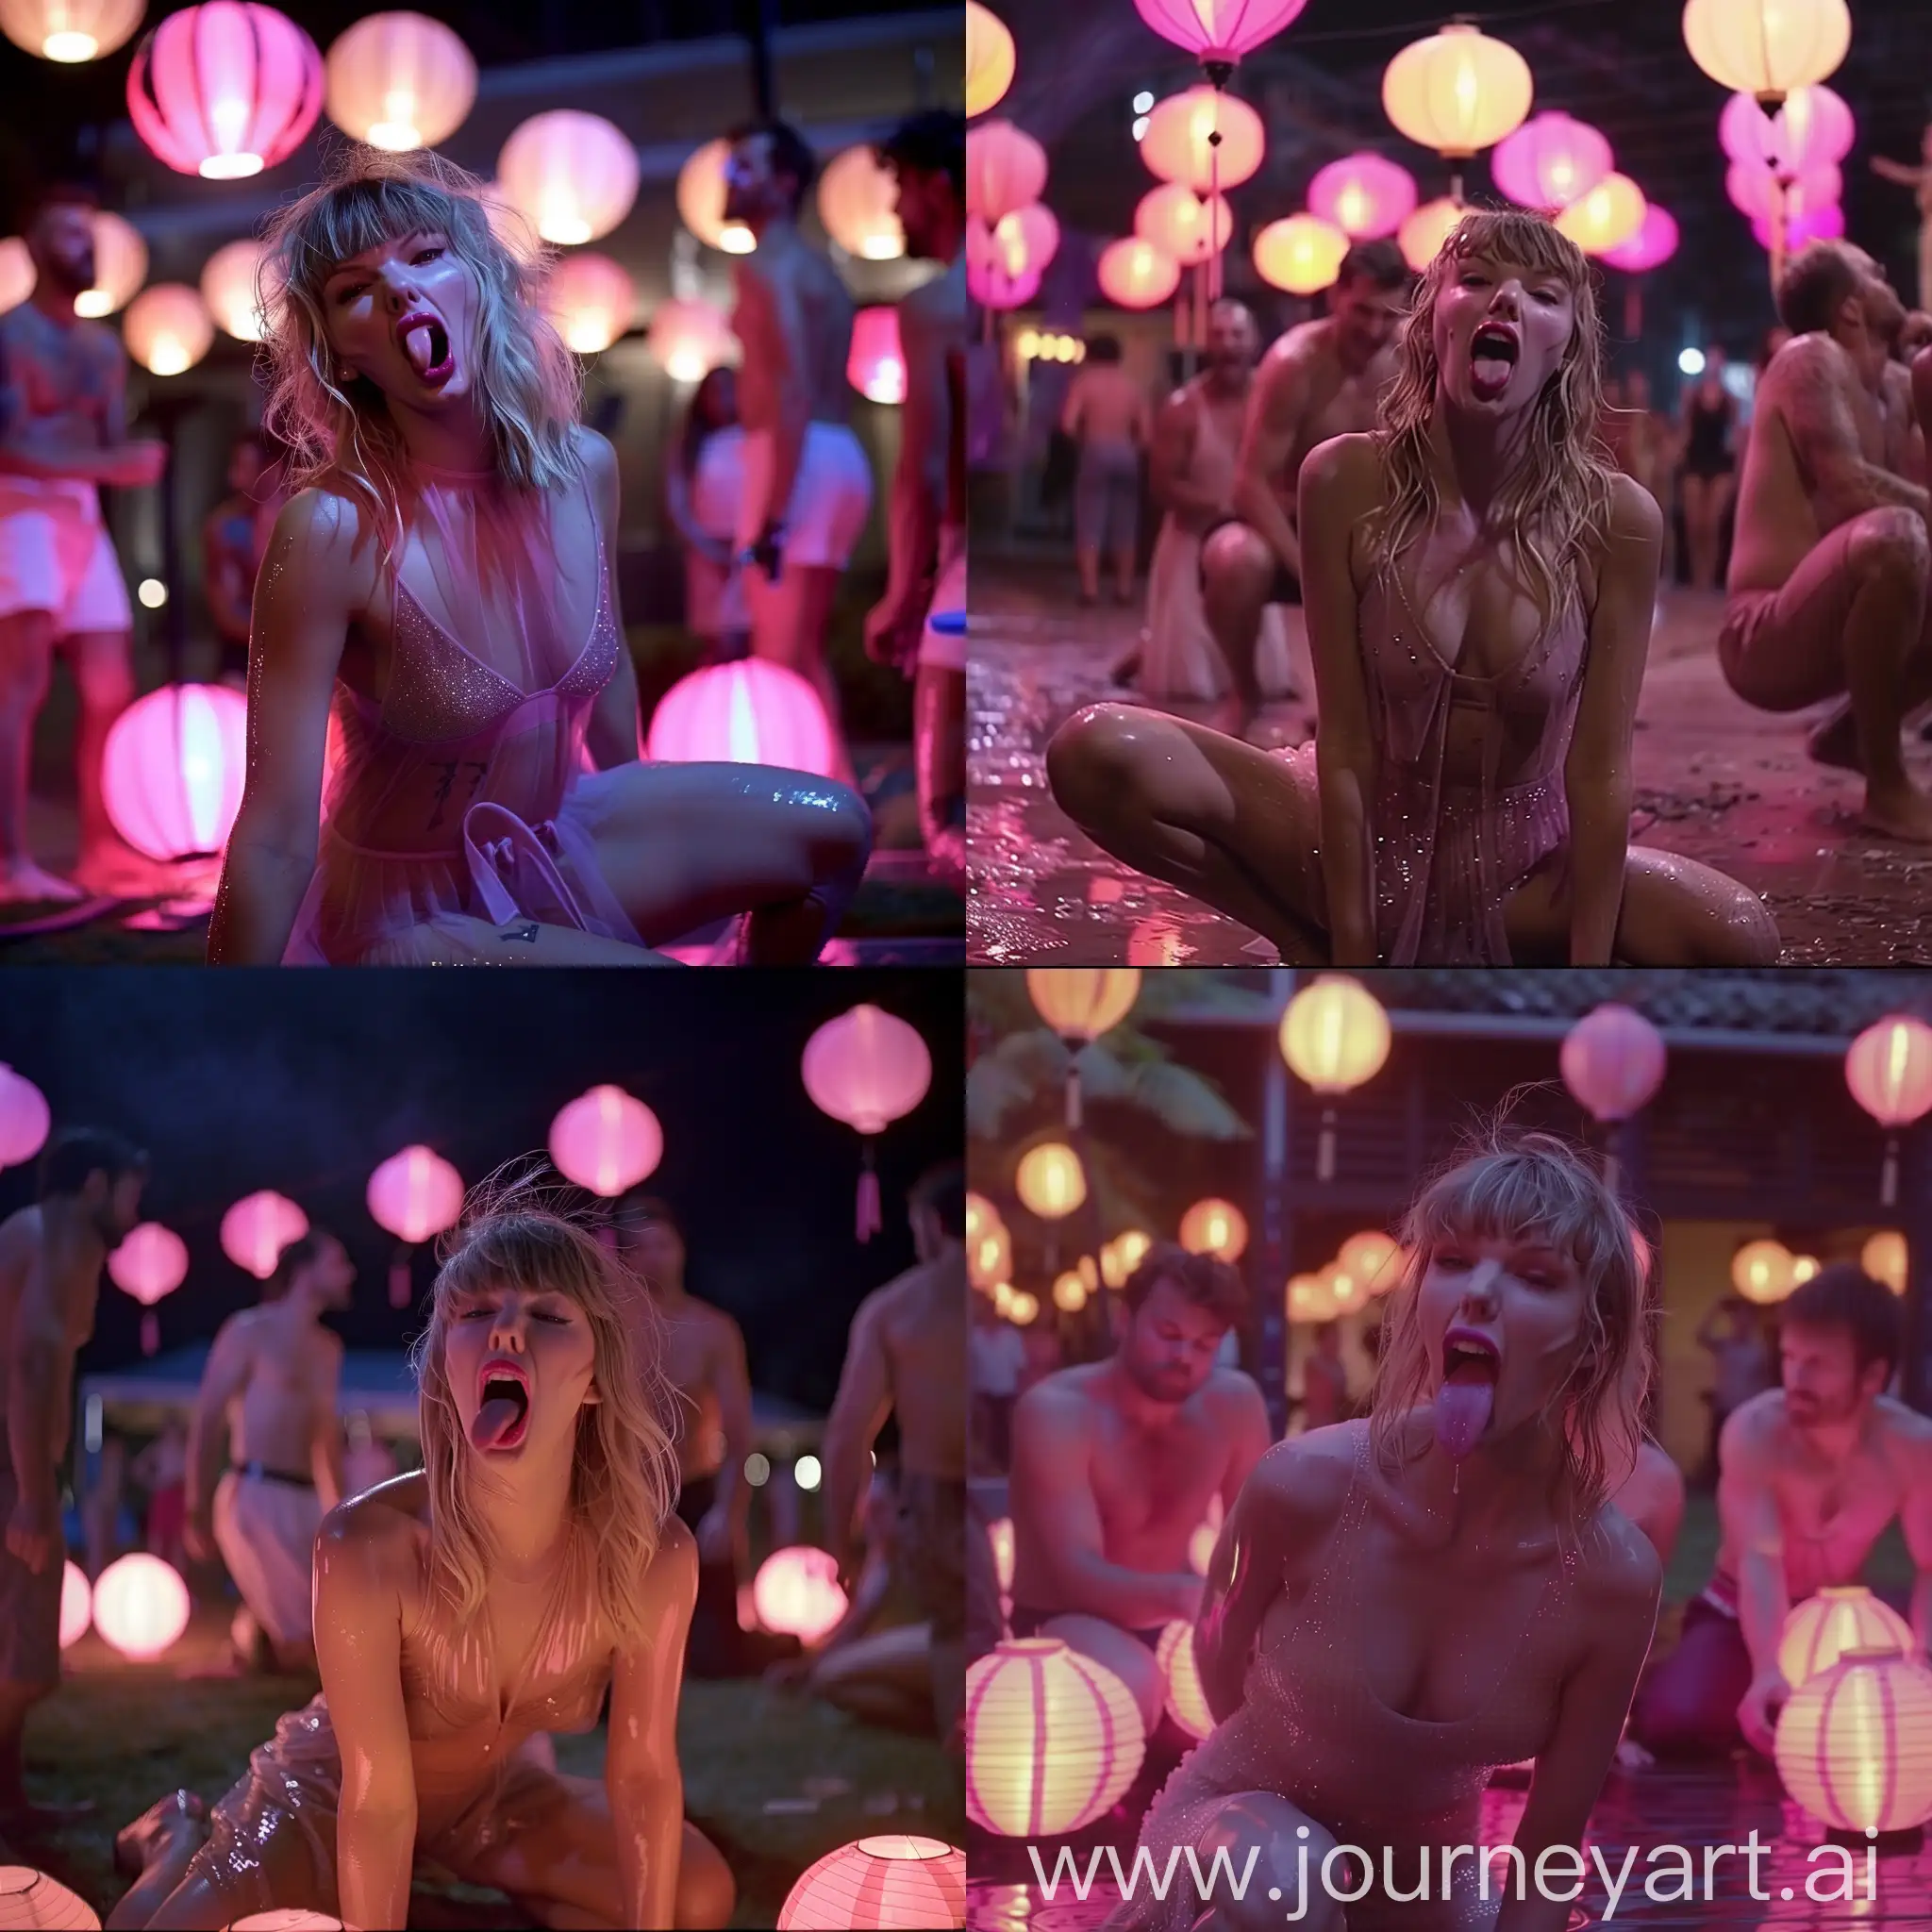 movie still, paper lanterns in background,Taylor Swift kneeling on the ground, tongue cleaning teeth, perspiration,fit abdomen,sheer dress,pink lighting,pink lipstick,hair styled as messy bangs,night,pronounced cheekbones,blond hair, surrounded by men